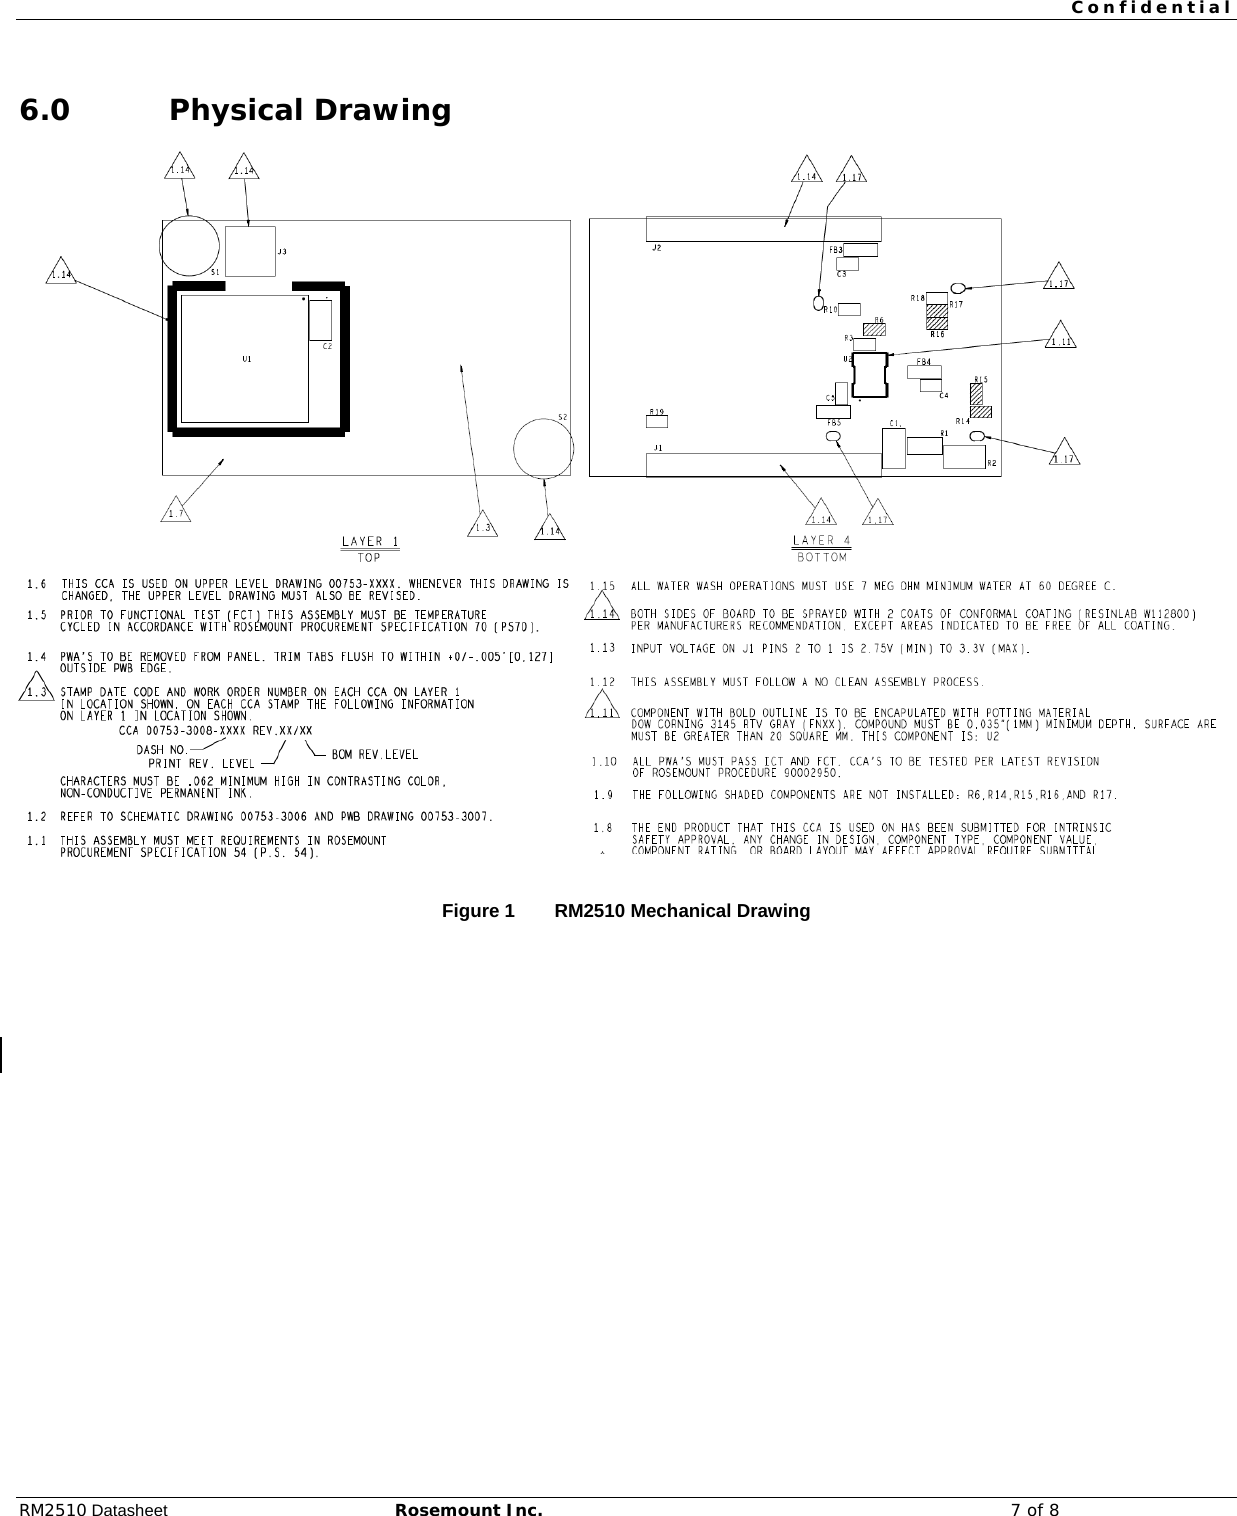  Confidential  RM2510 Datasheet Rosemount Inc.  7 of 8  6.0 Physical Drawing                      Figure 1  RM2510 Mechanical Drawing    